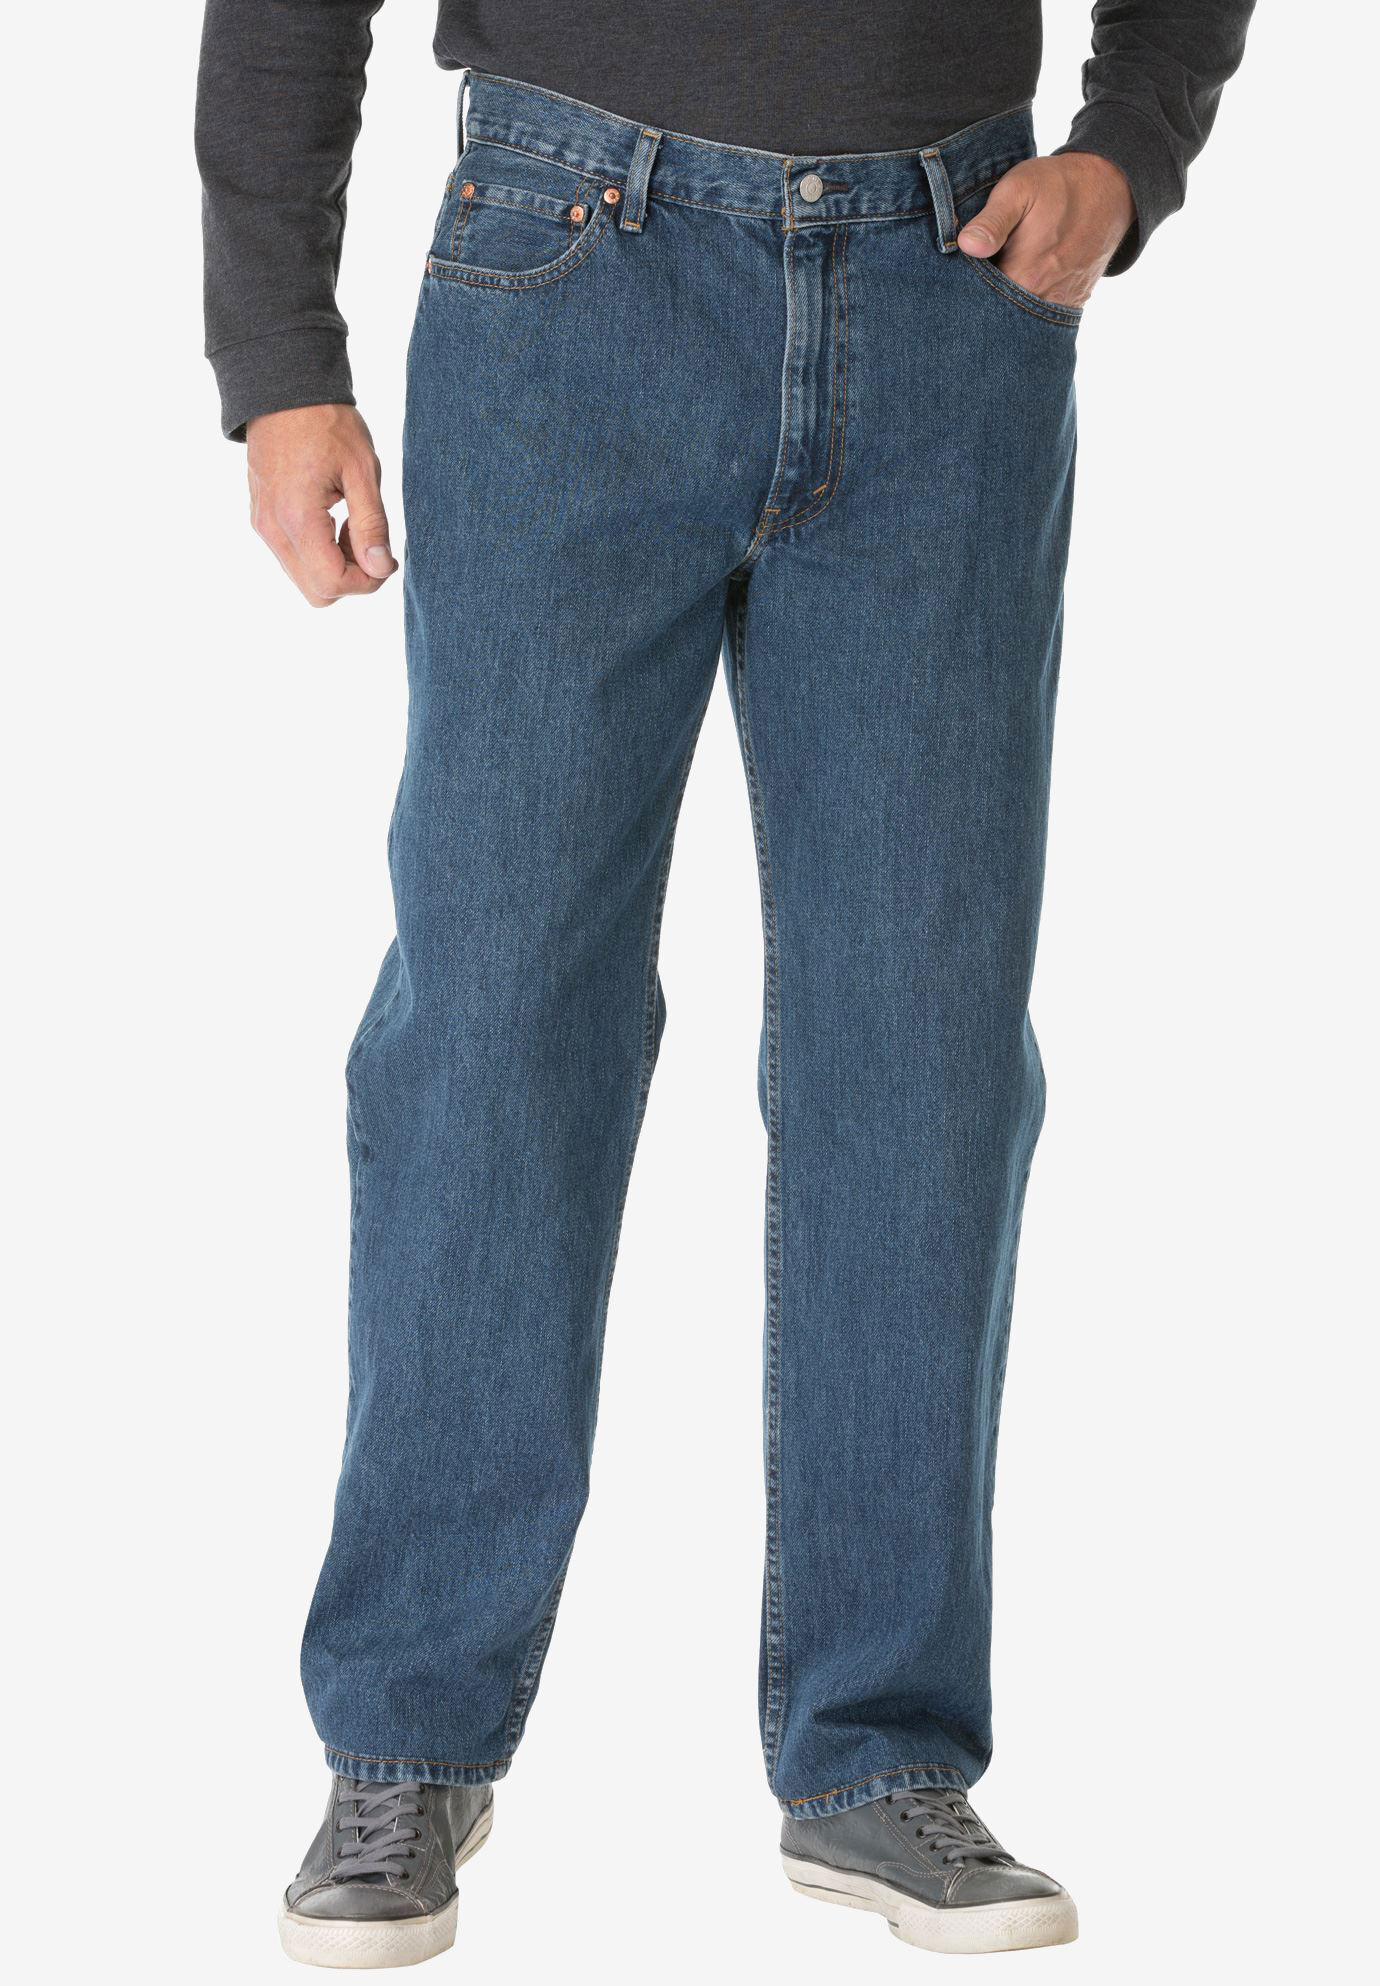 levi jeans tall sizes